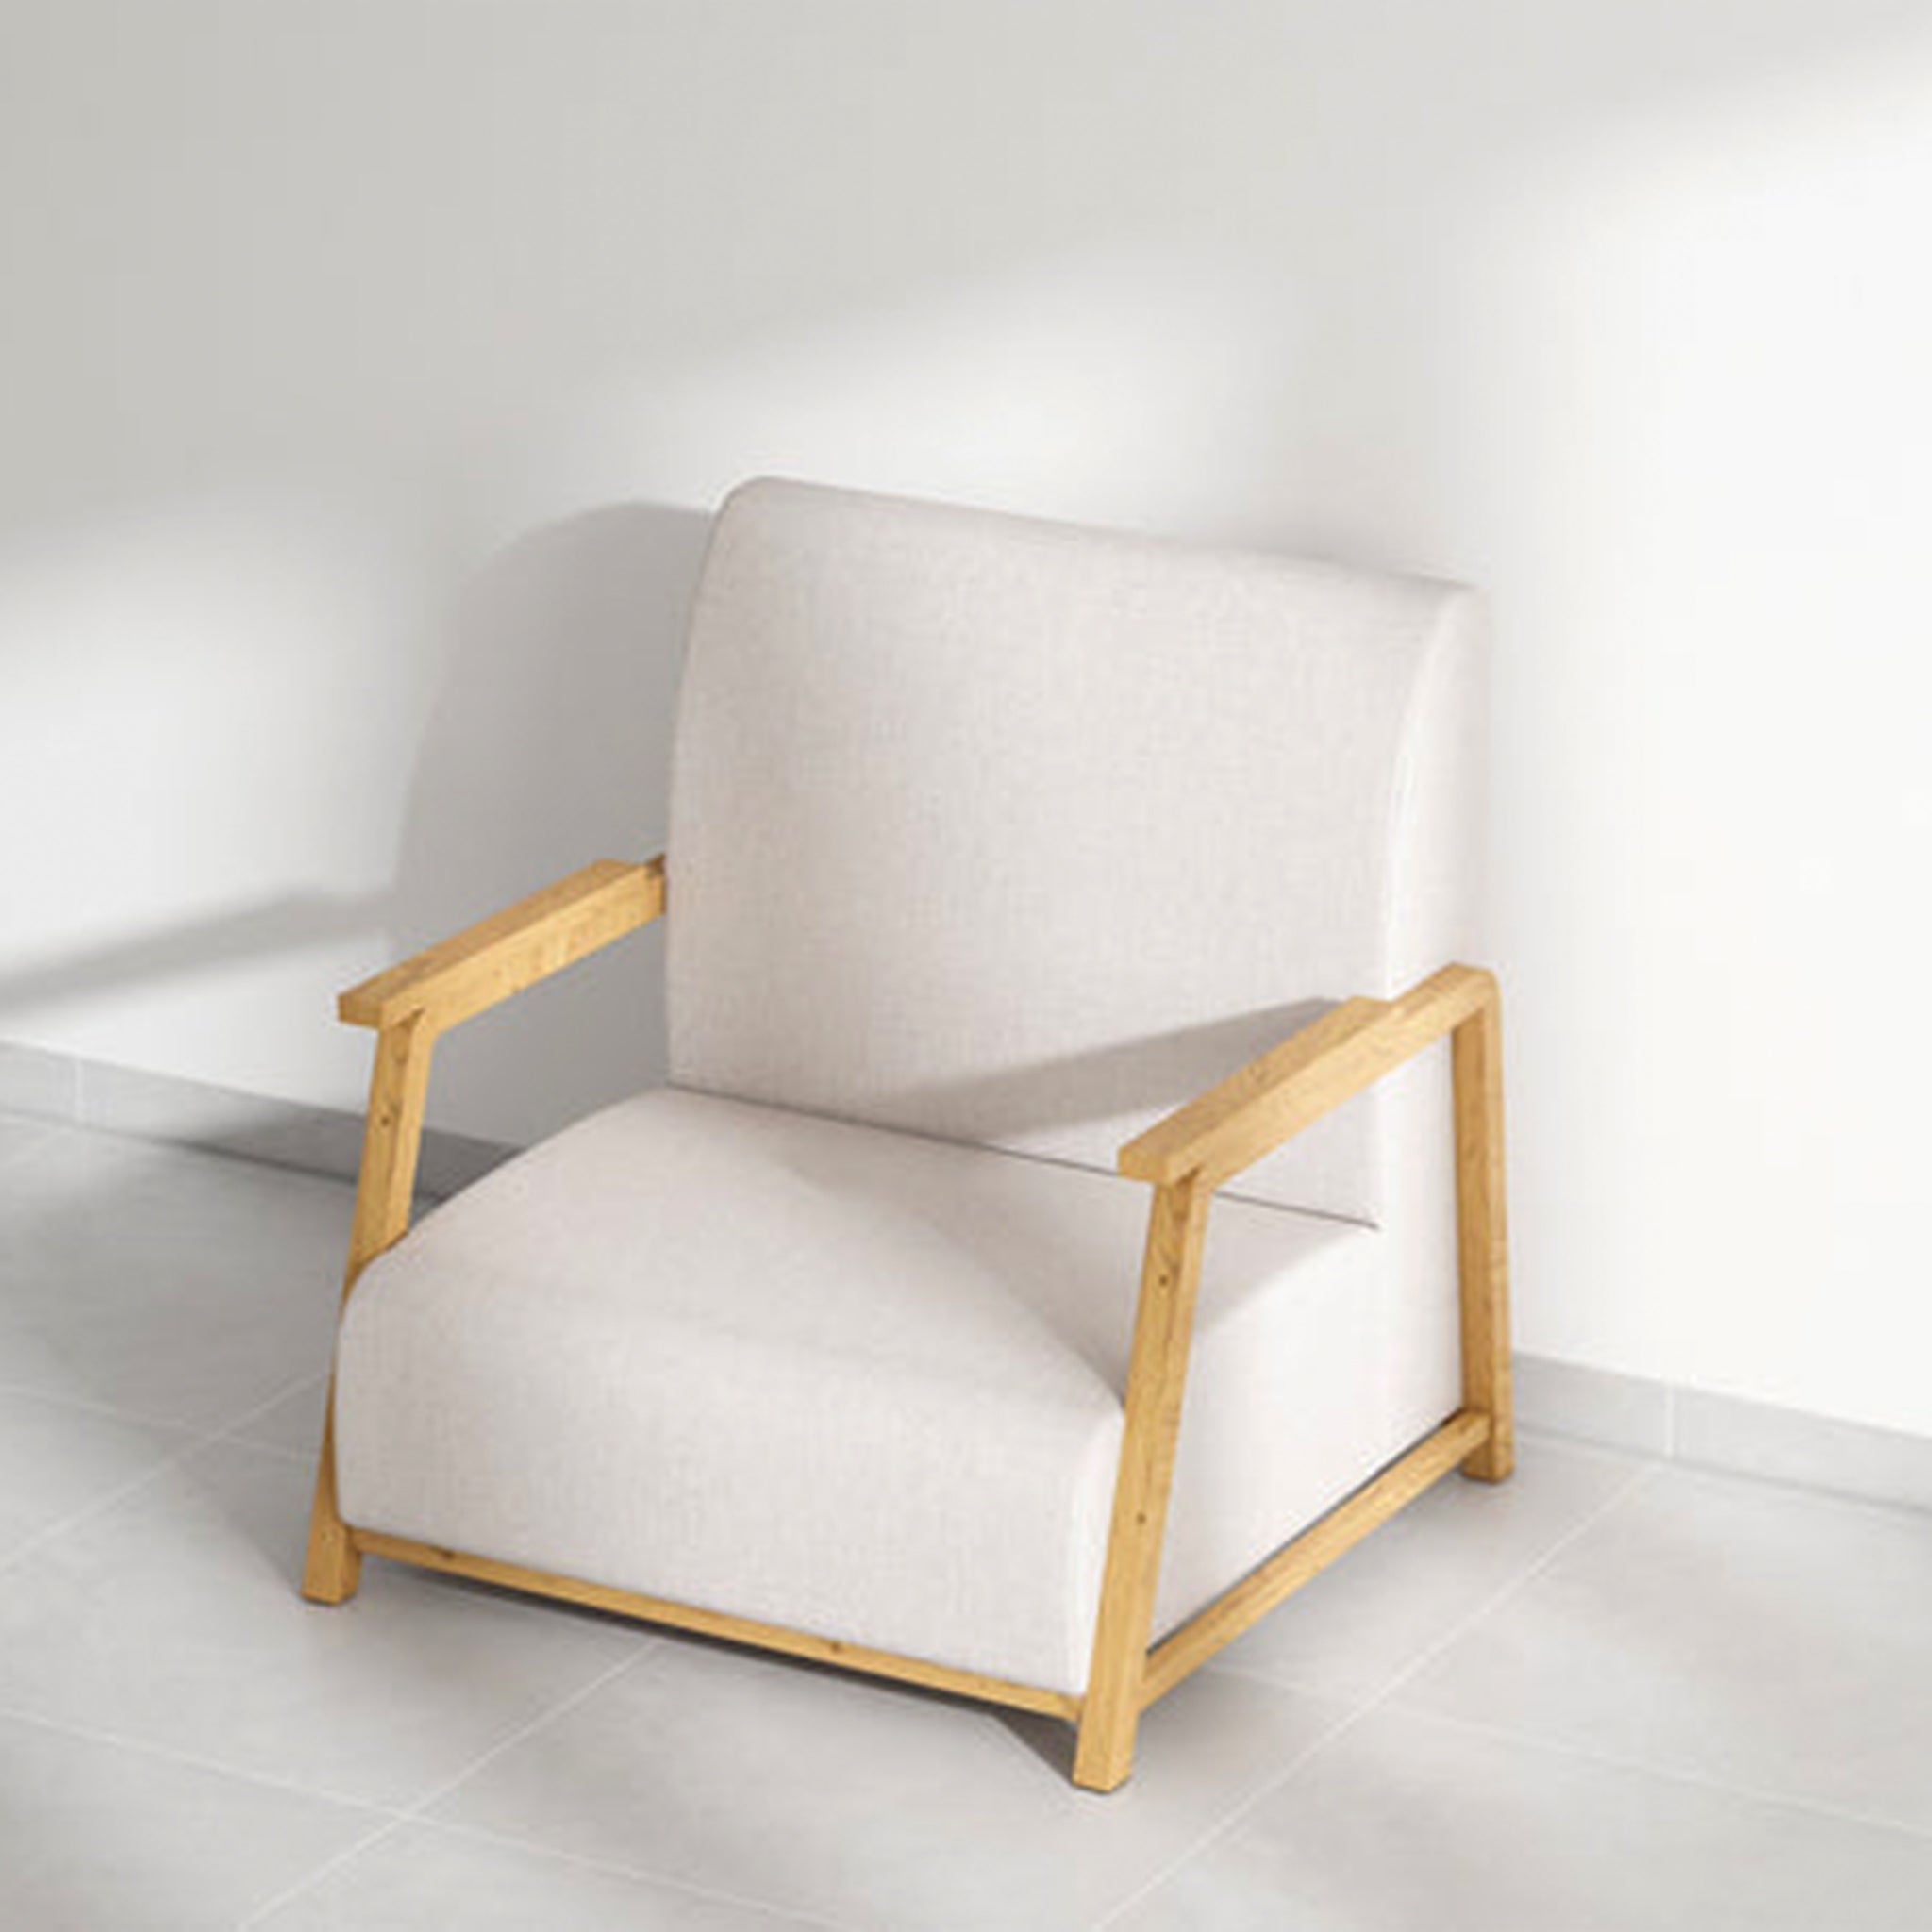 Beige Dixon Arm Accent Chair with a sturdy wooden frame."